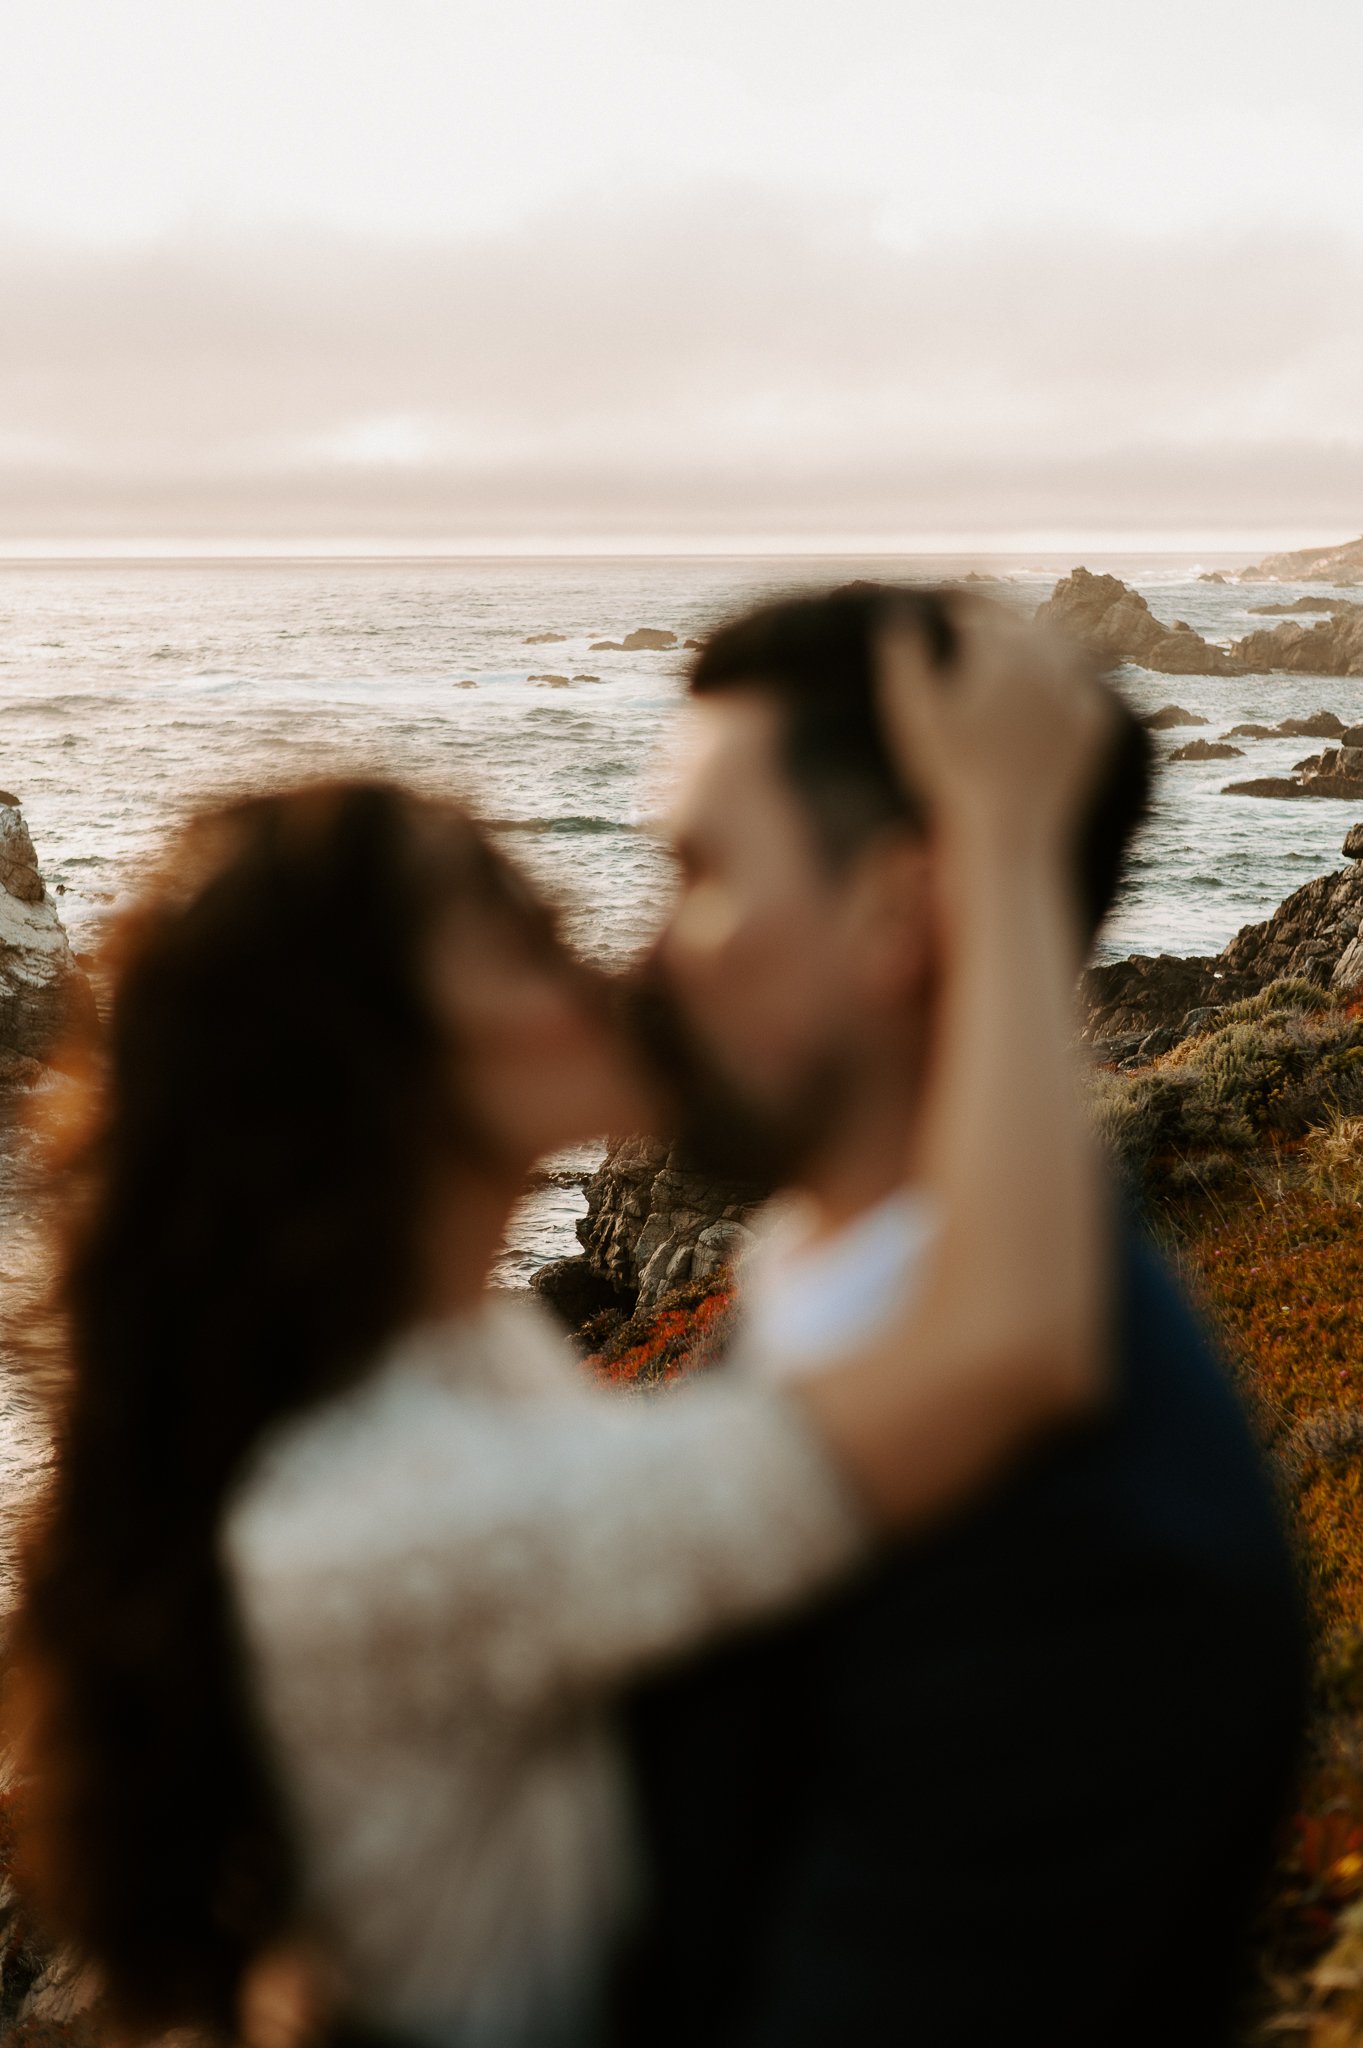 Newly engaged couple upper bodies showing kissing on cliff above Pacific Ocean in background